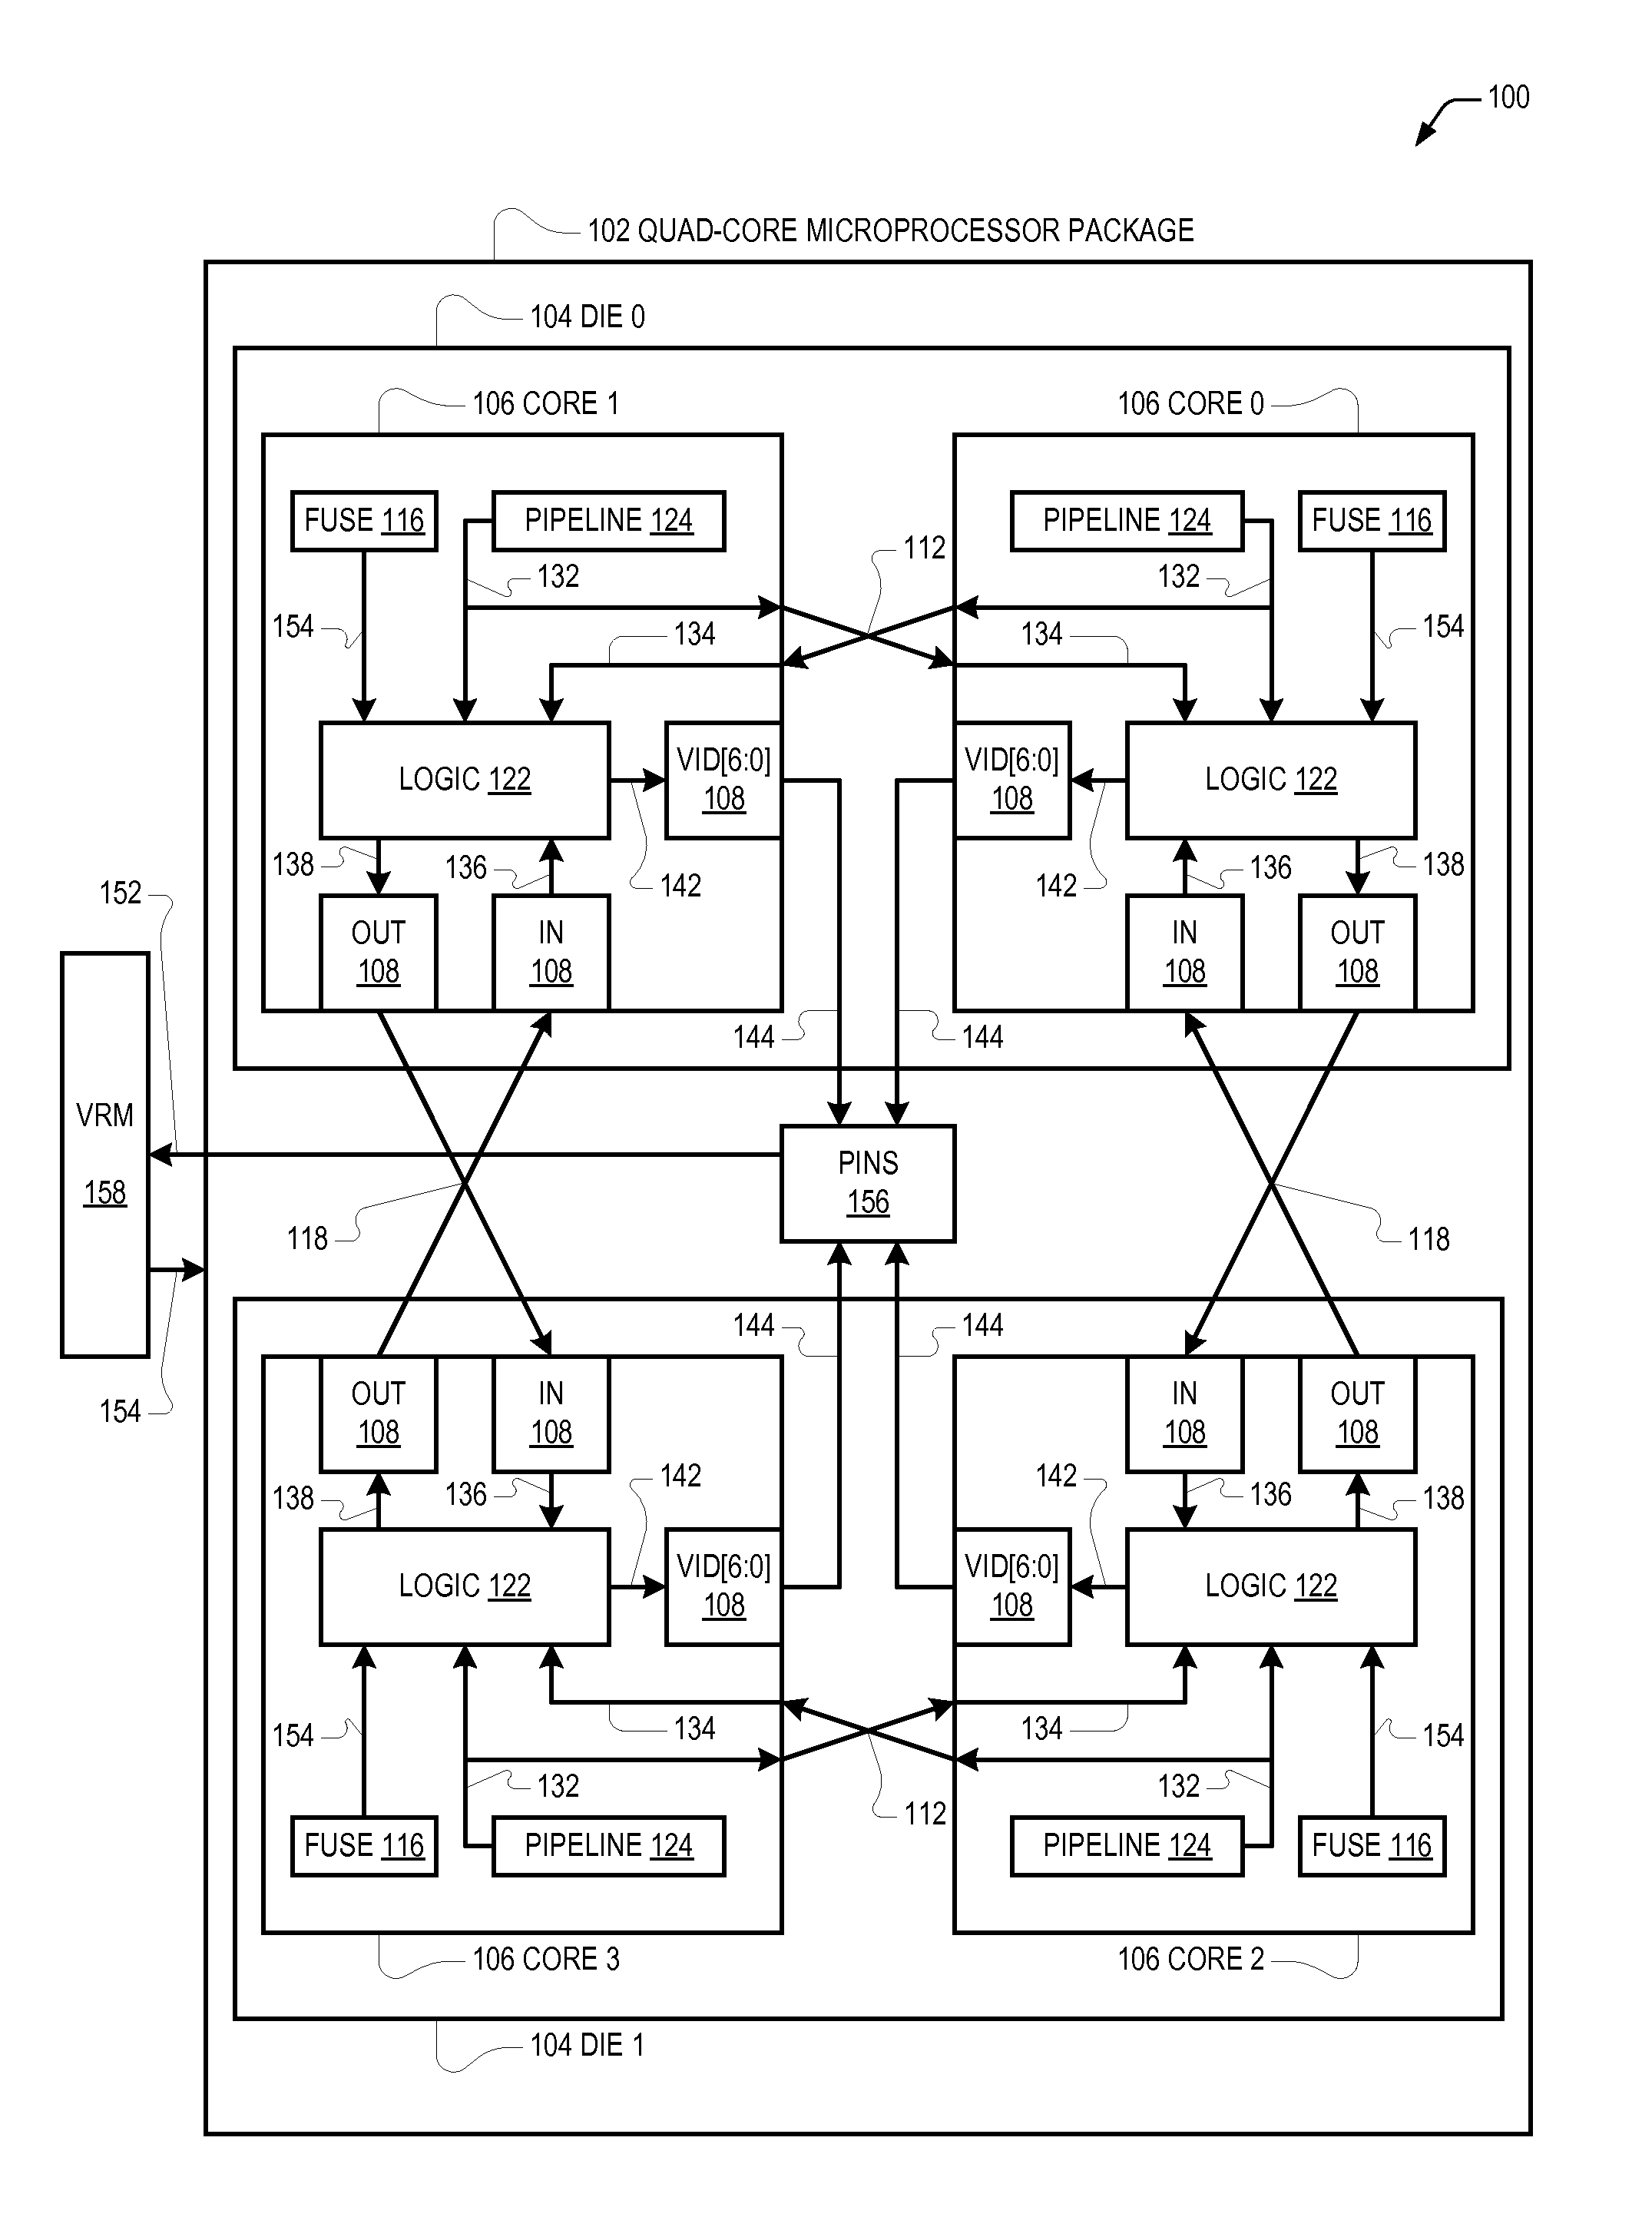 Distributed management of a shared power source to a multi-core microprocessor